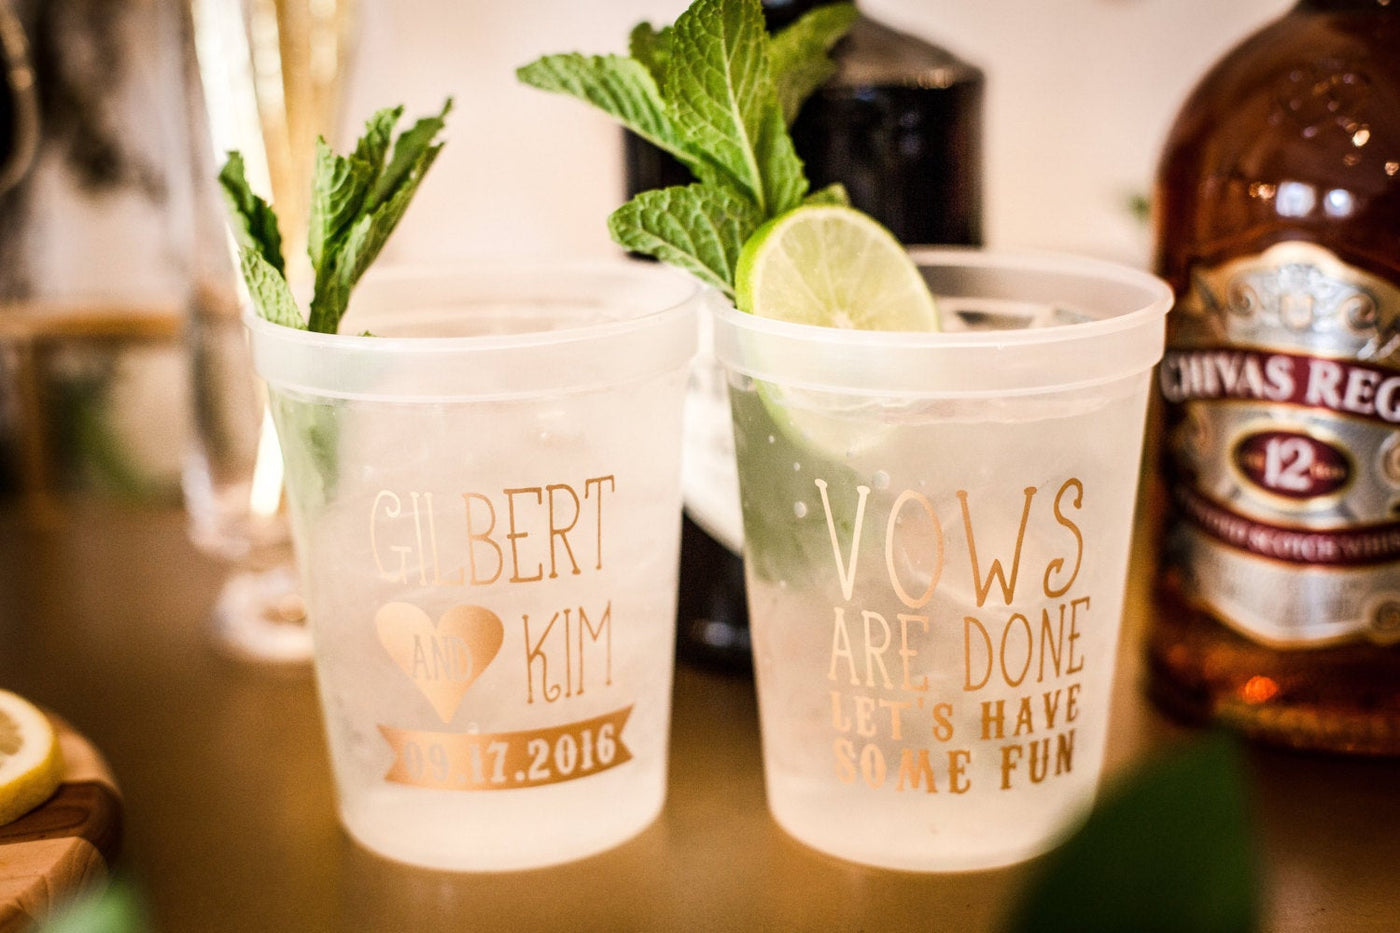 Vows are Done Wedding Reception Stadium Cups #1117